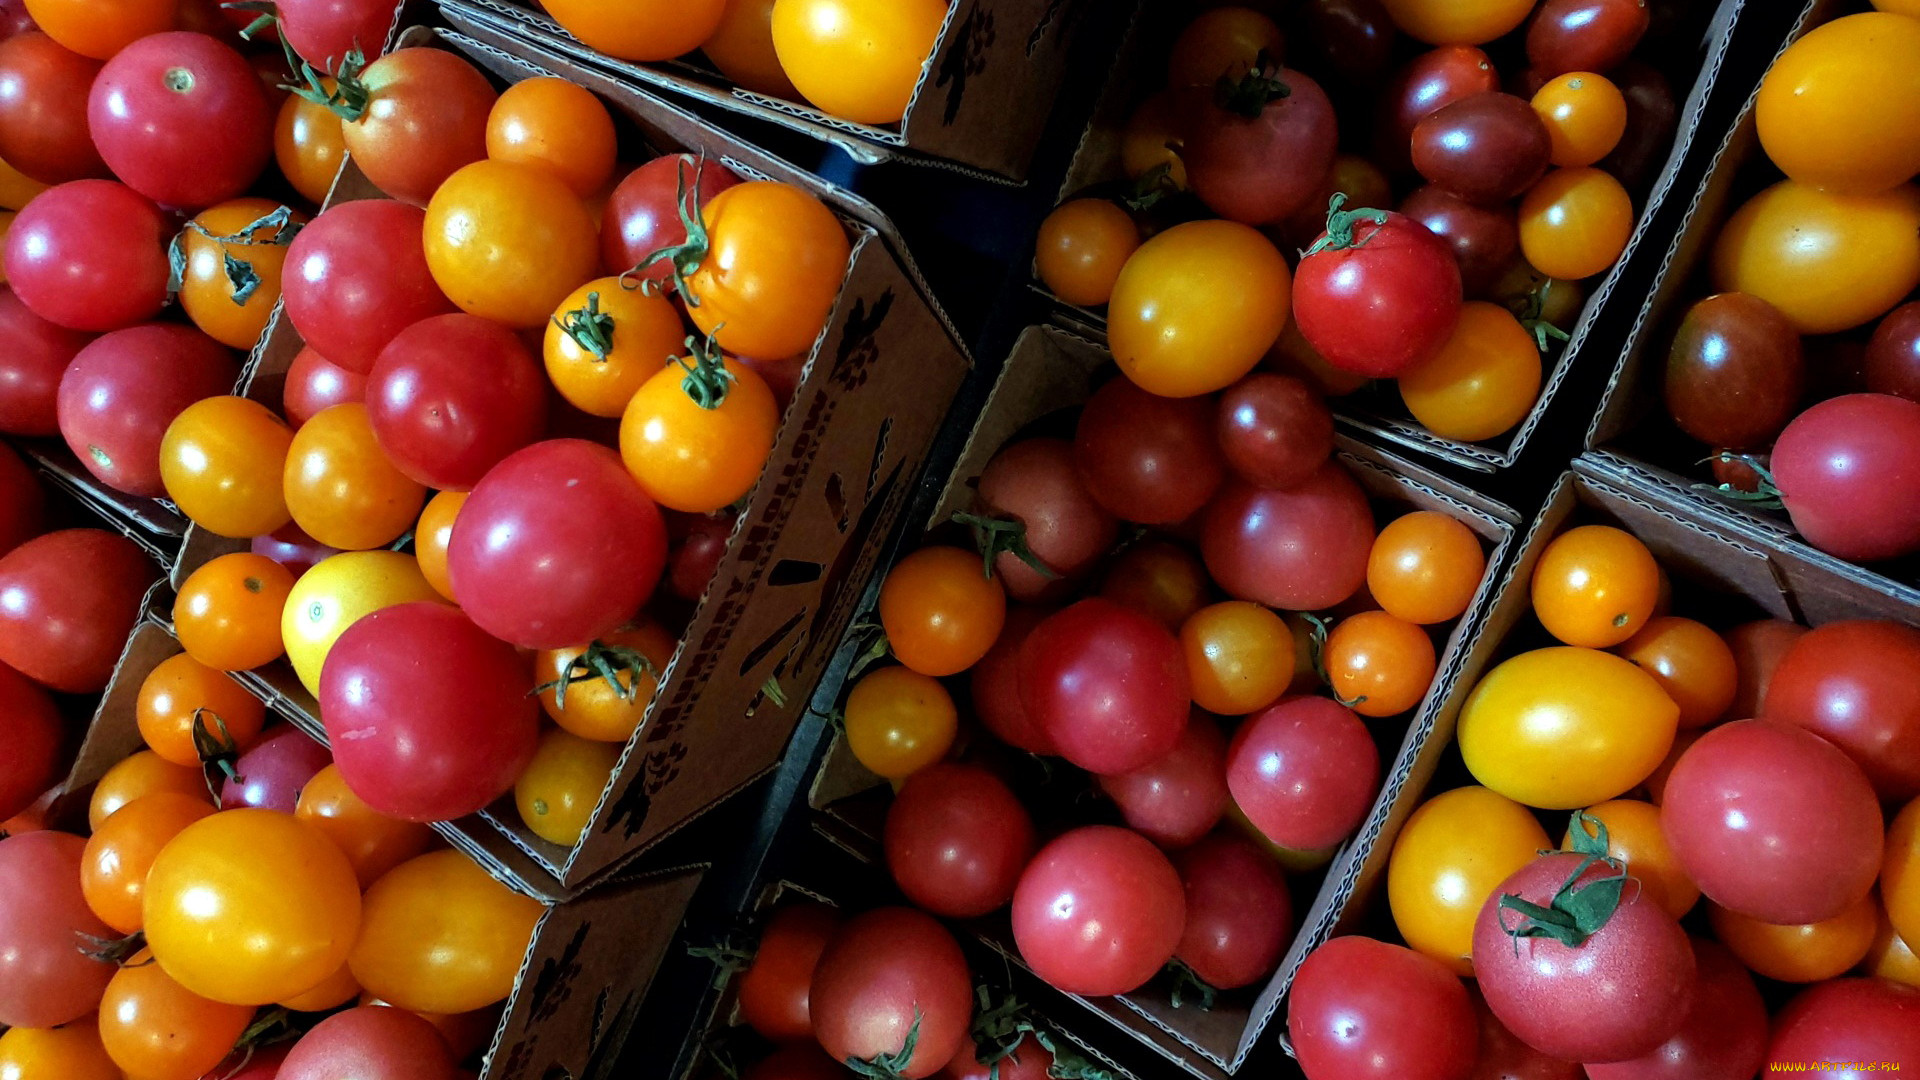 General 1920x1080 colorful food vegetables tomatoes